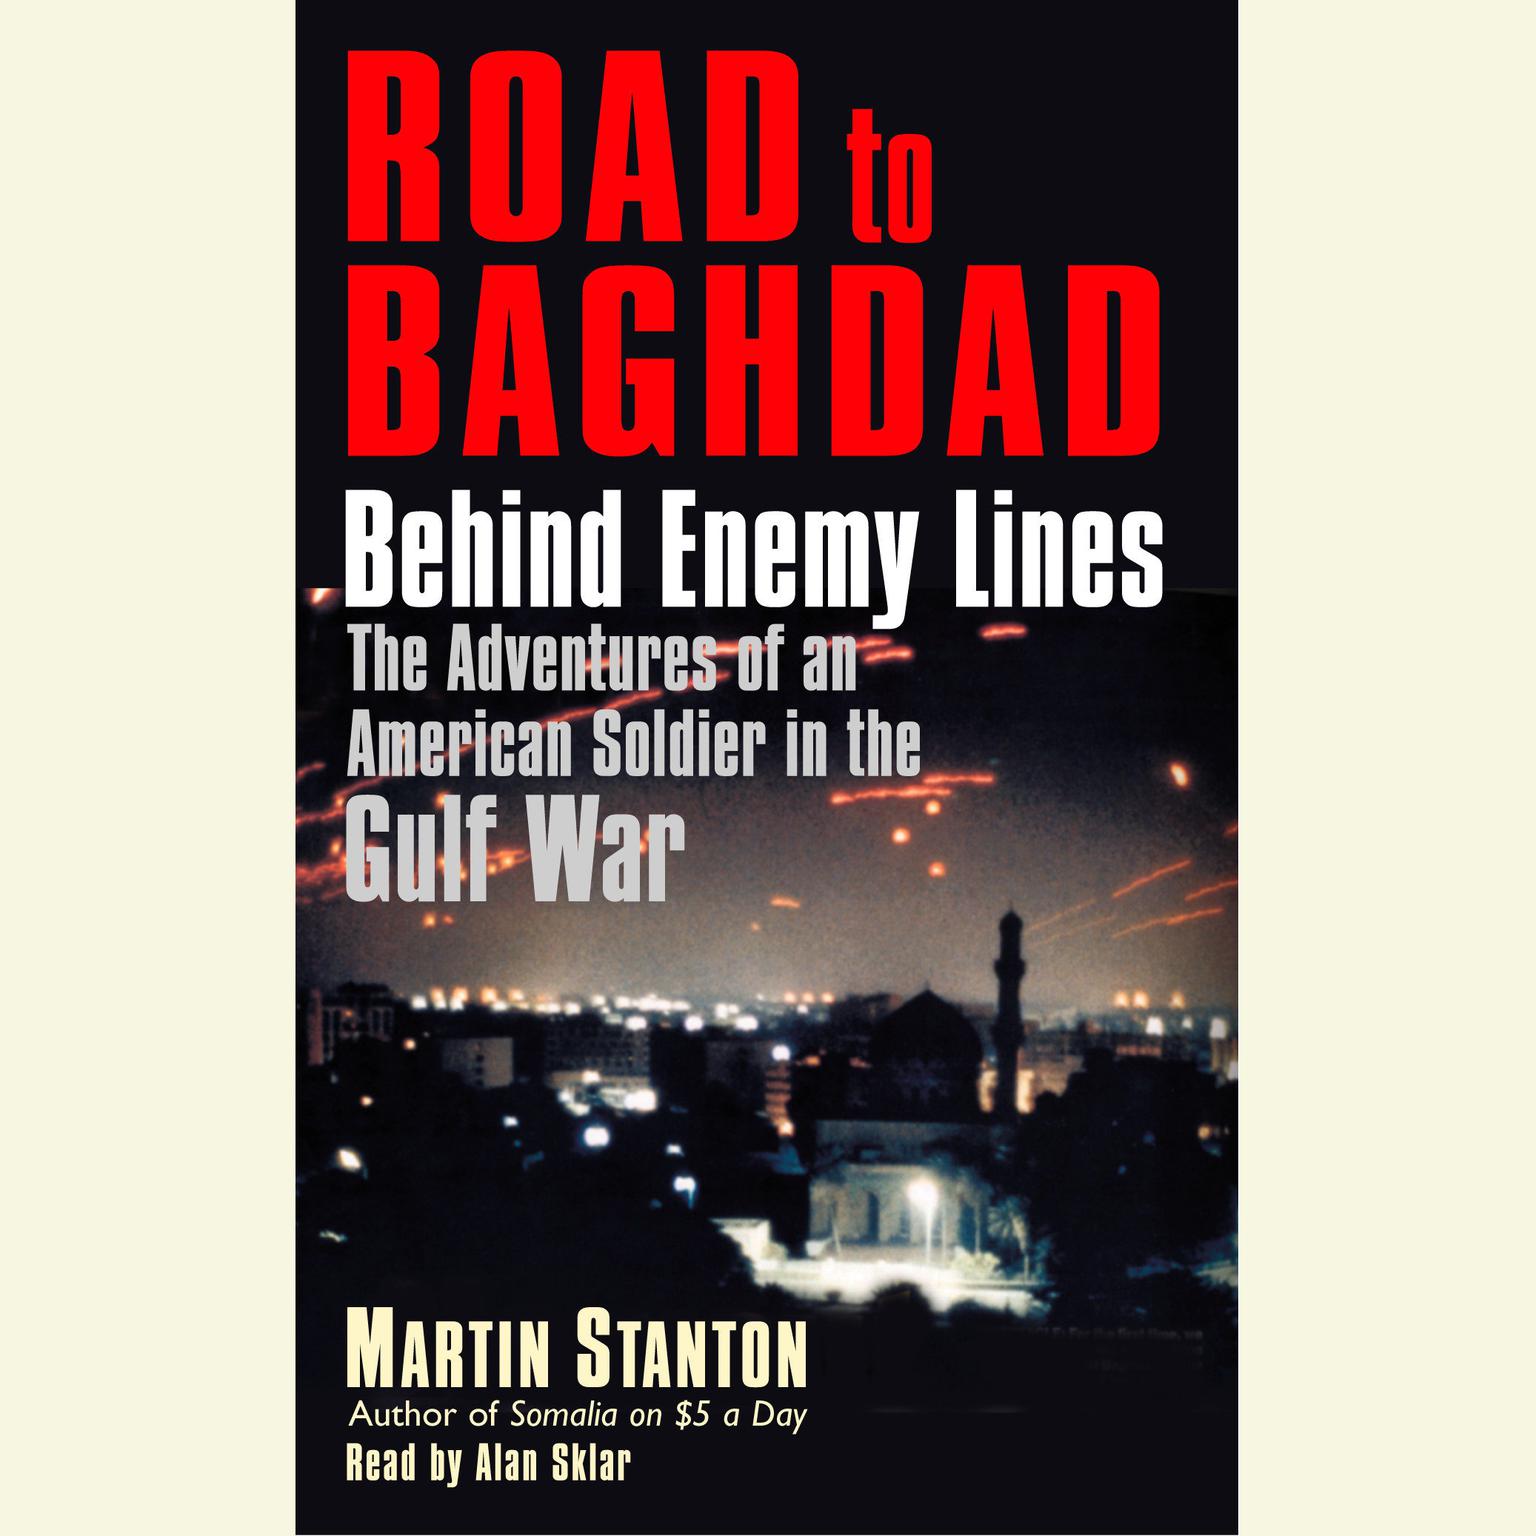 Road to Baghdad (Abridged): Behind Enemy Lines: The Adventures of an American Soldier in the Gulf War Audiobook, by Martin Stanton